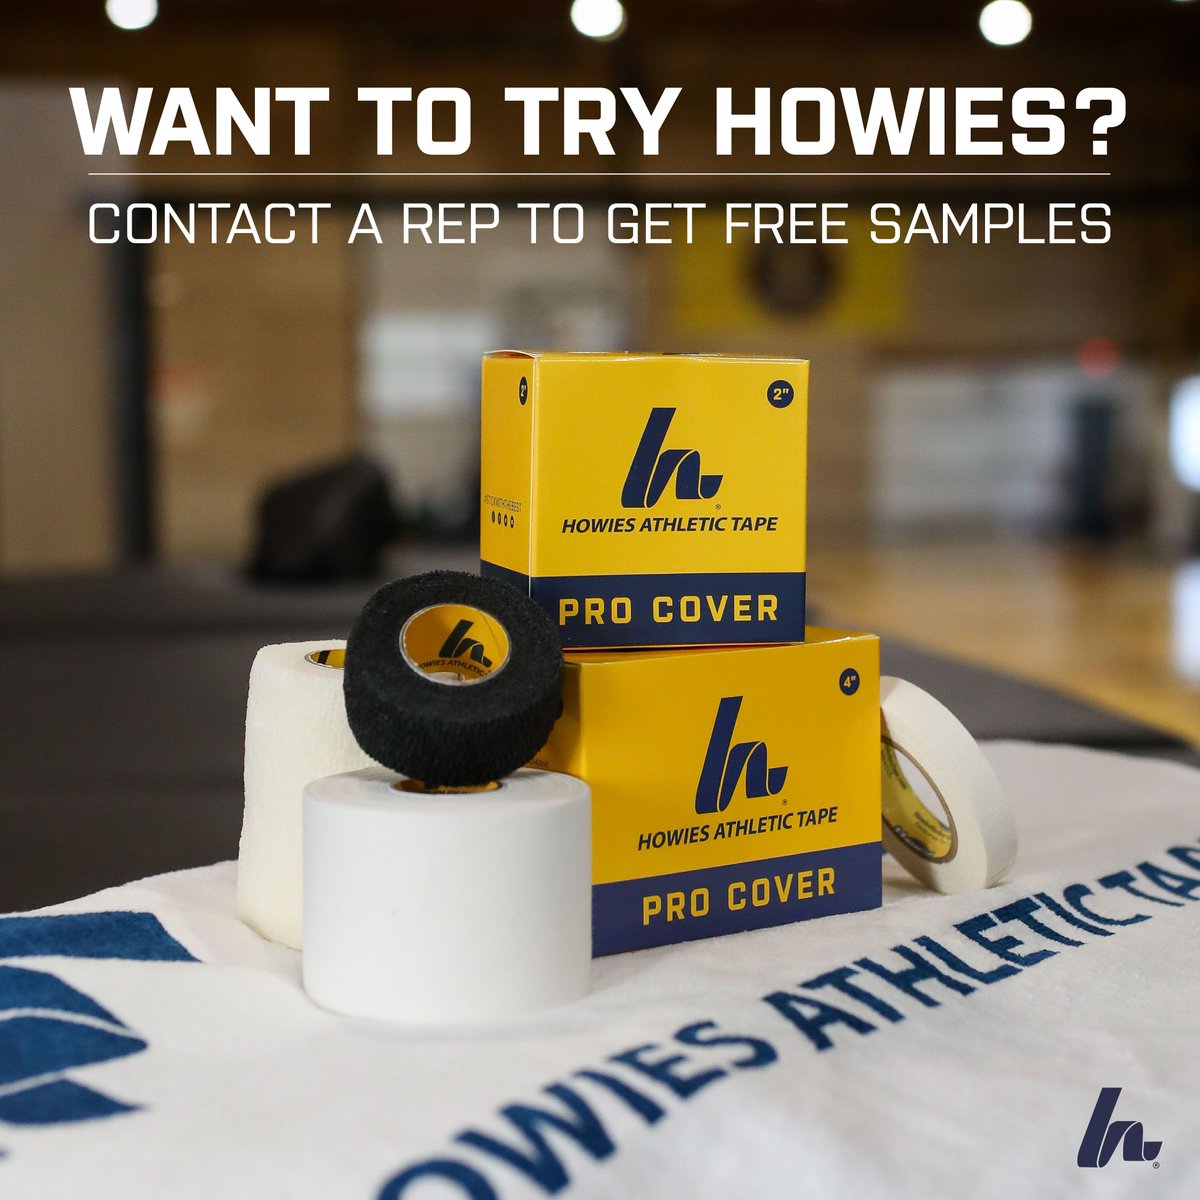 If you haven't tried Howies, you're really missing out! Are you an AT with a team or a school? Shoot us a DM to get some free samples! #StickWithTheBest